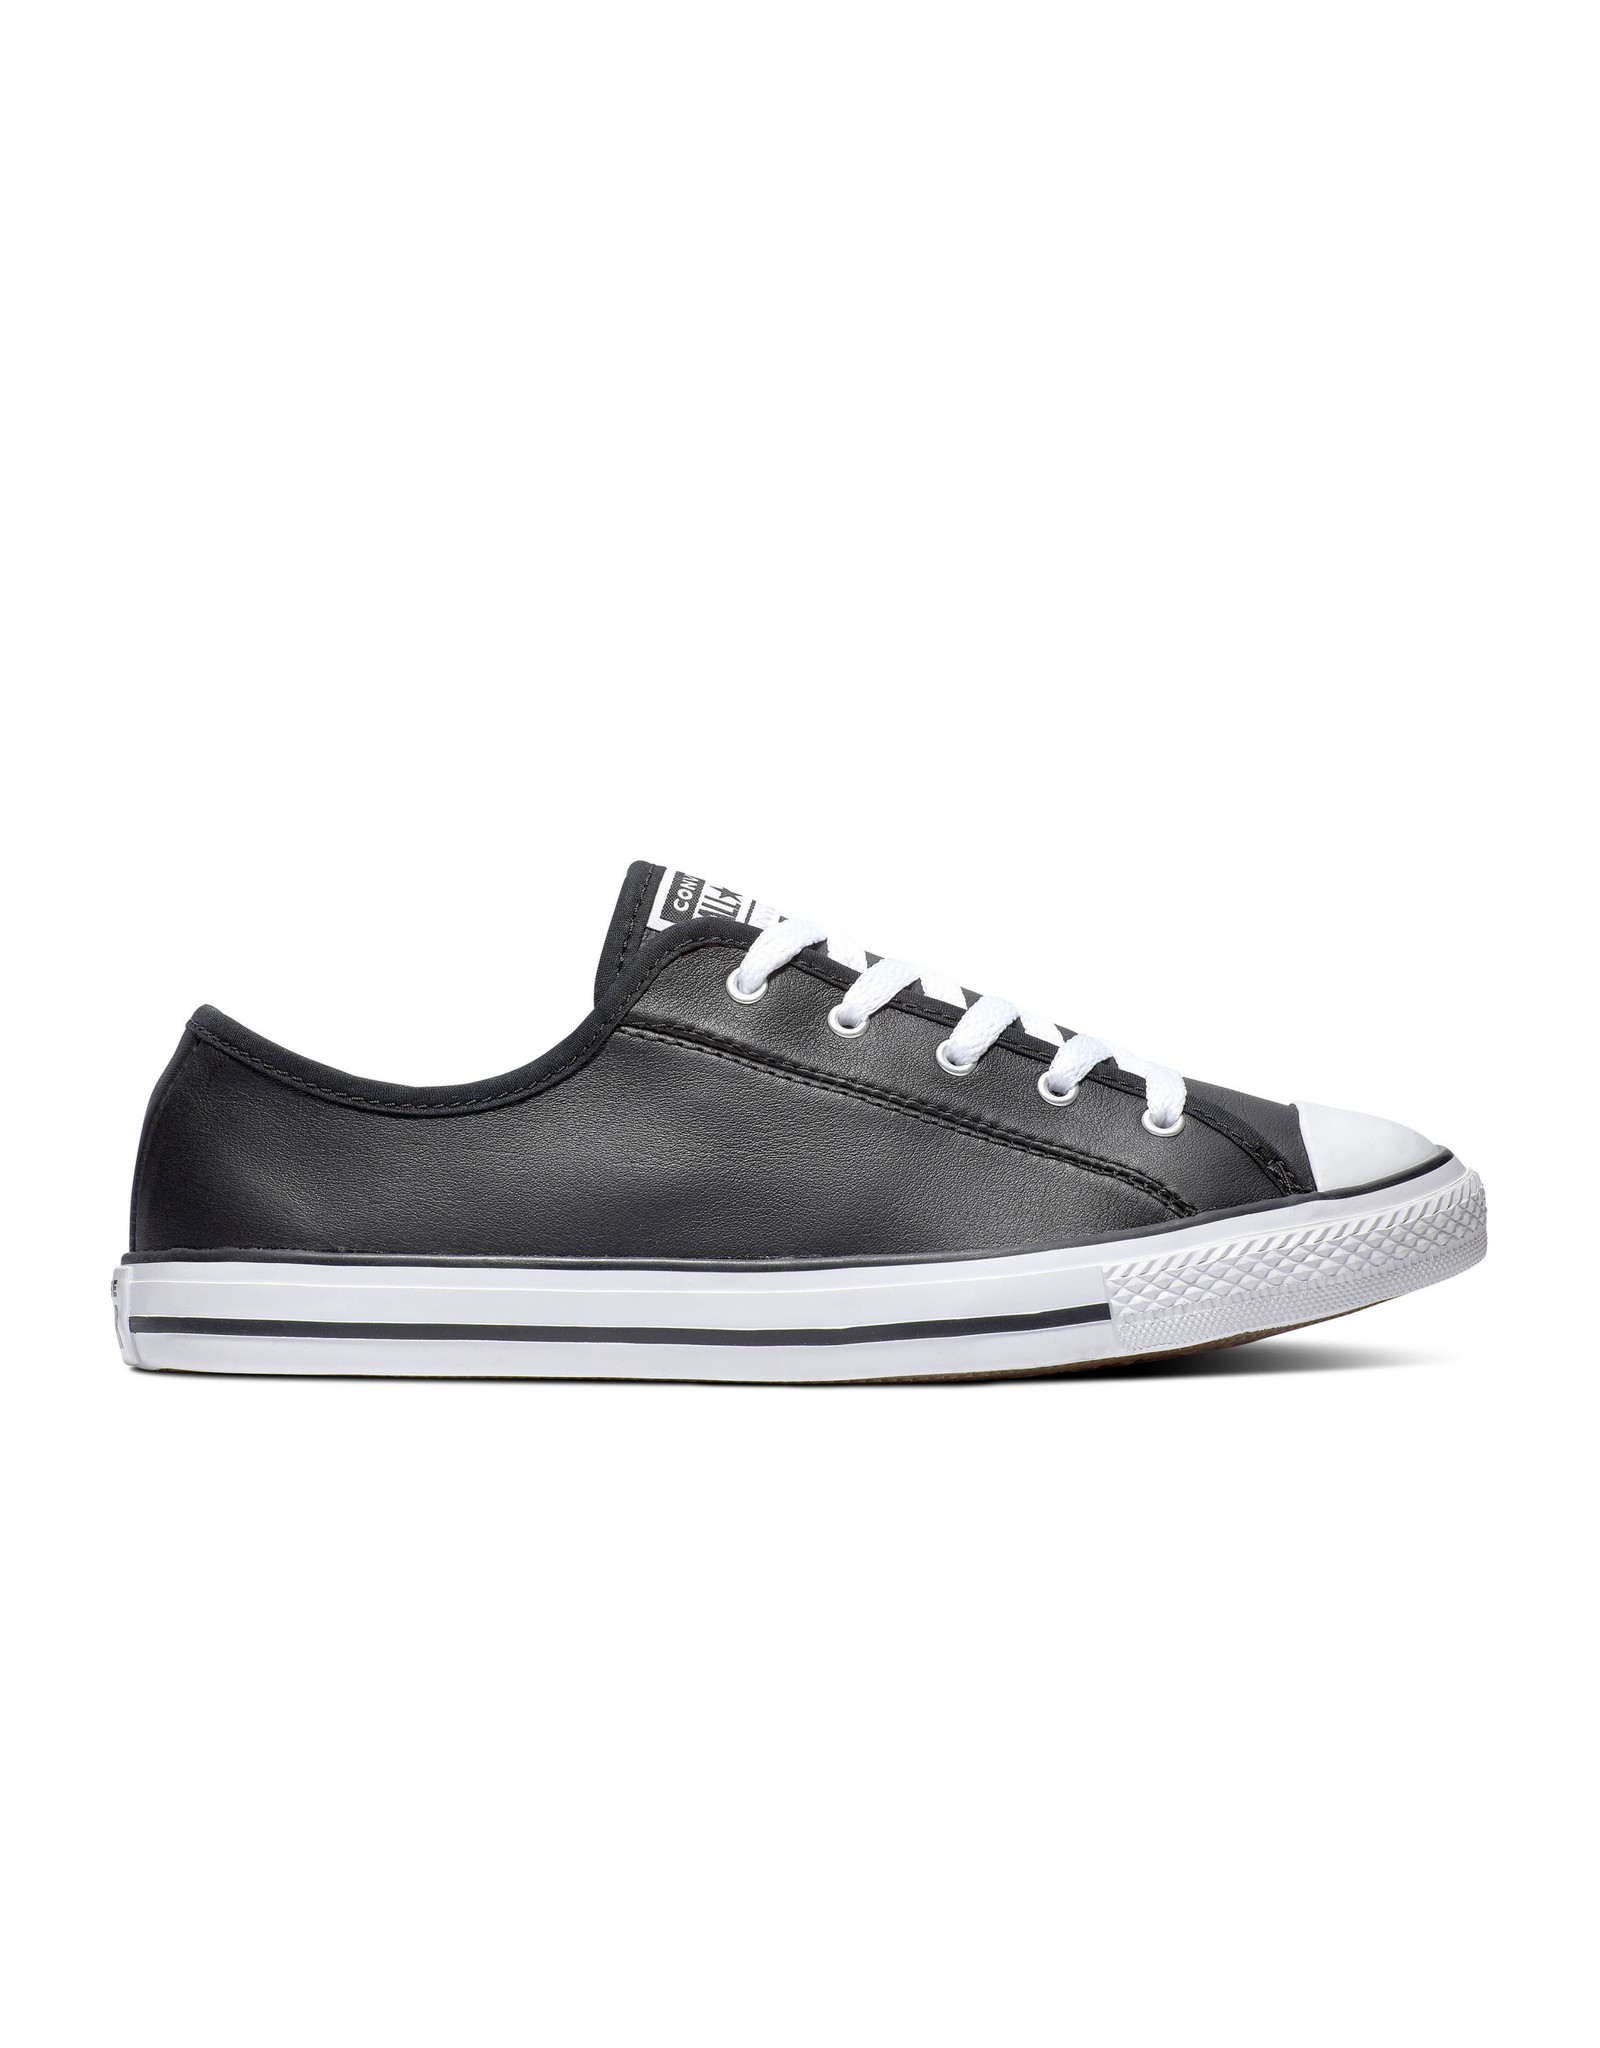 converse chuck taylor all star dainty ox leather